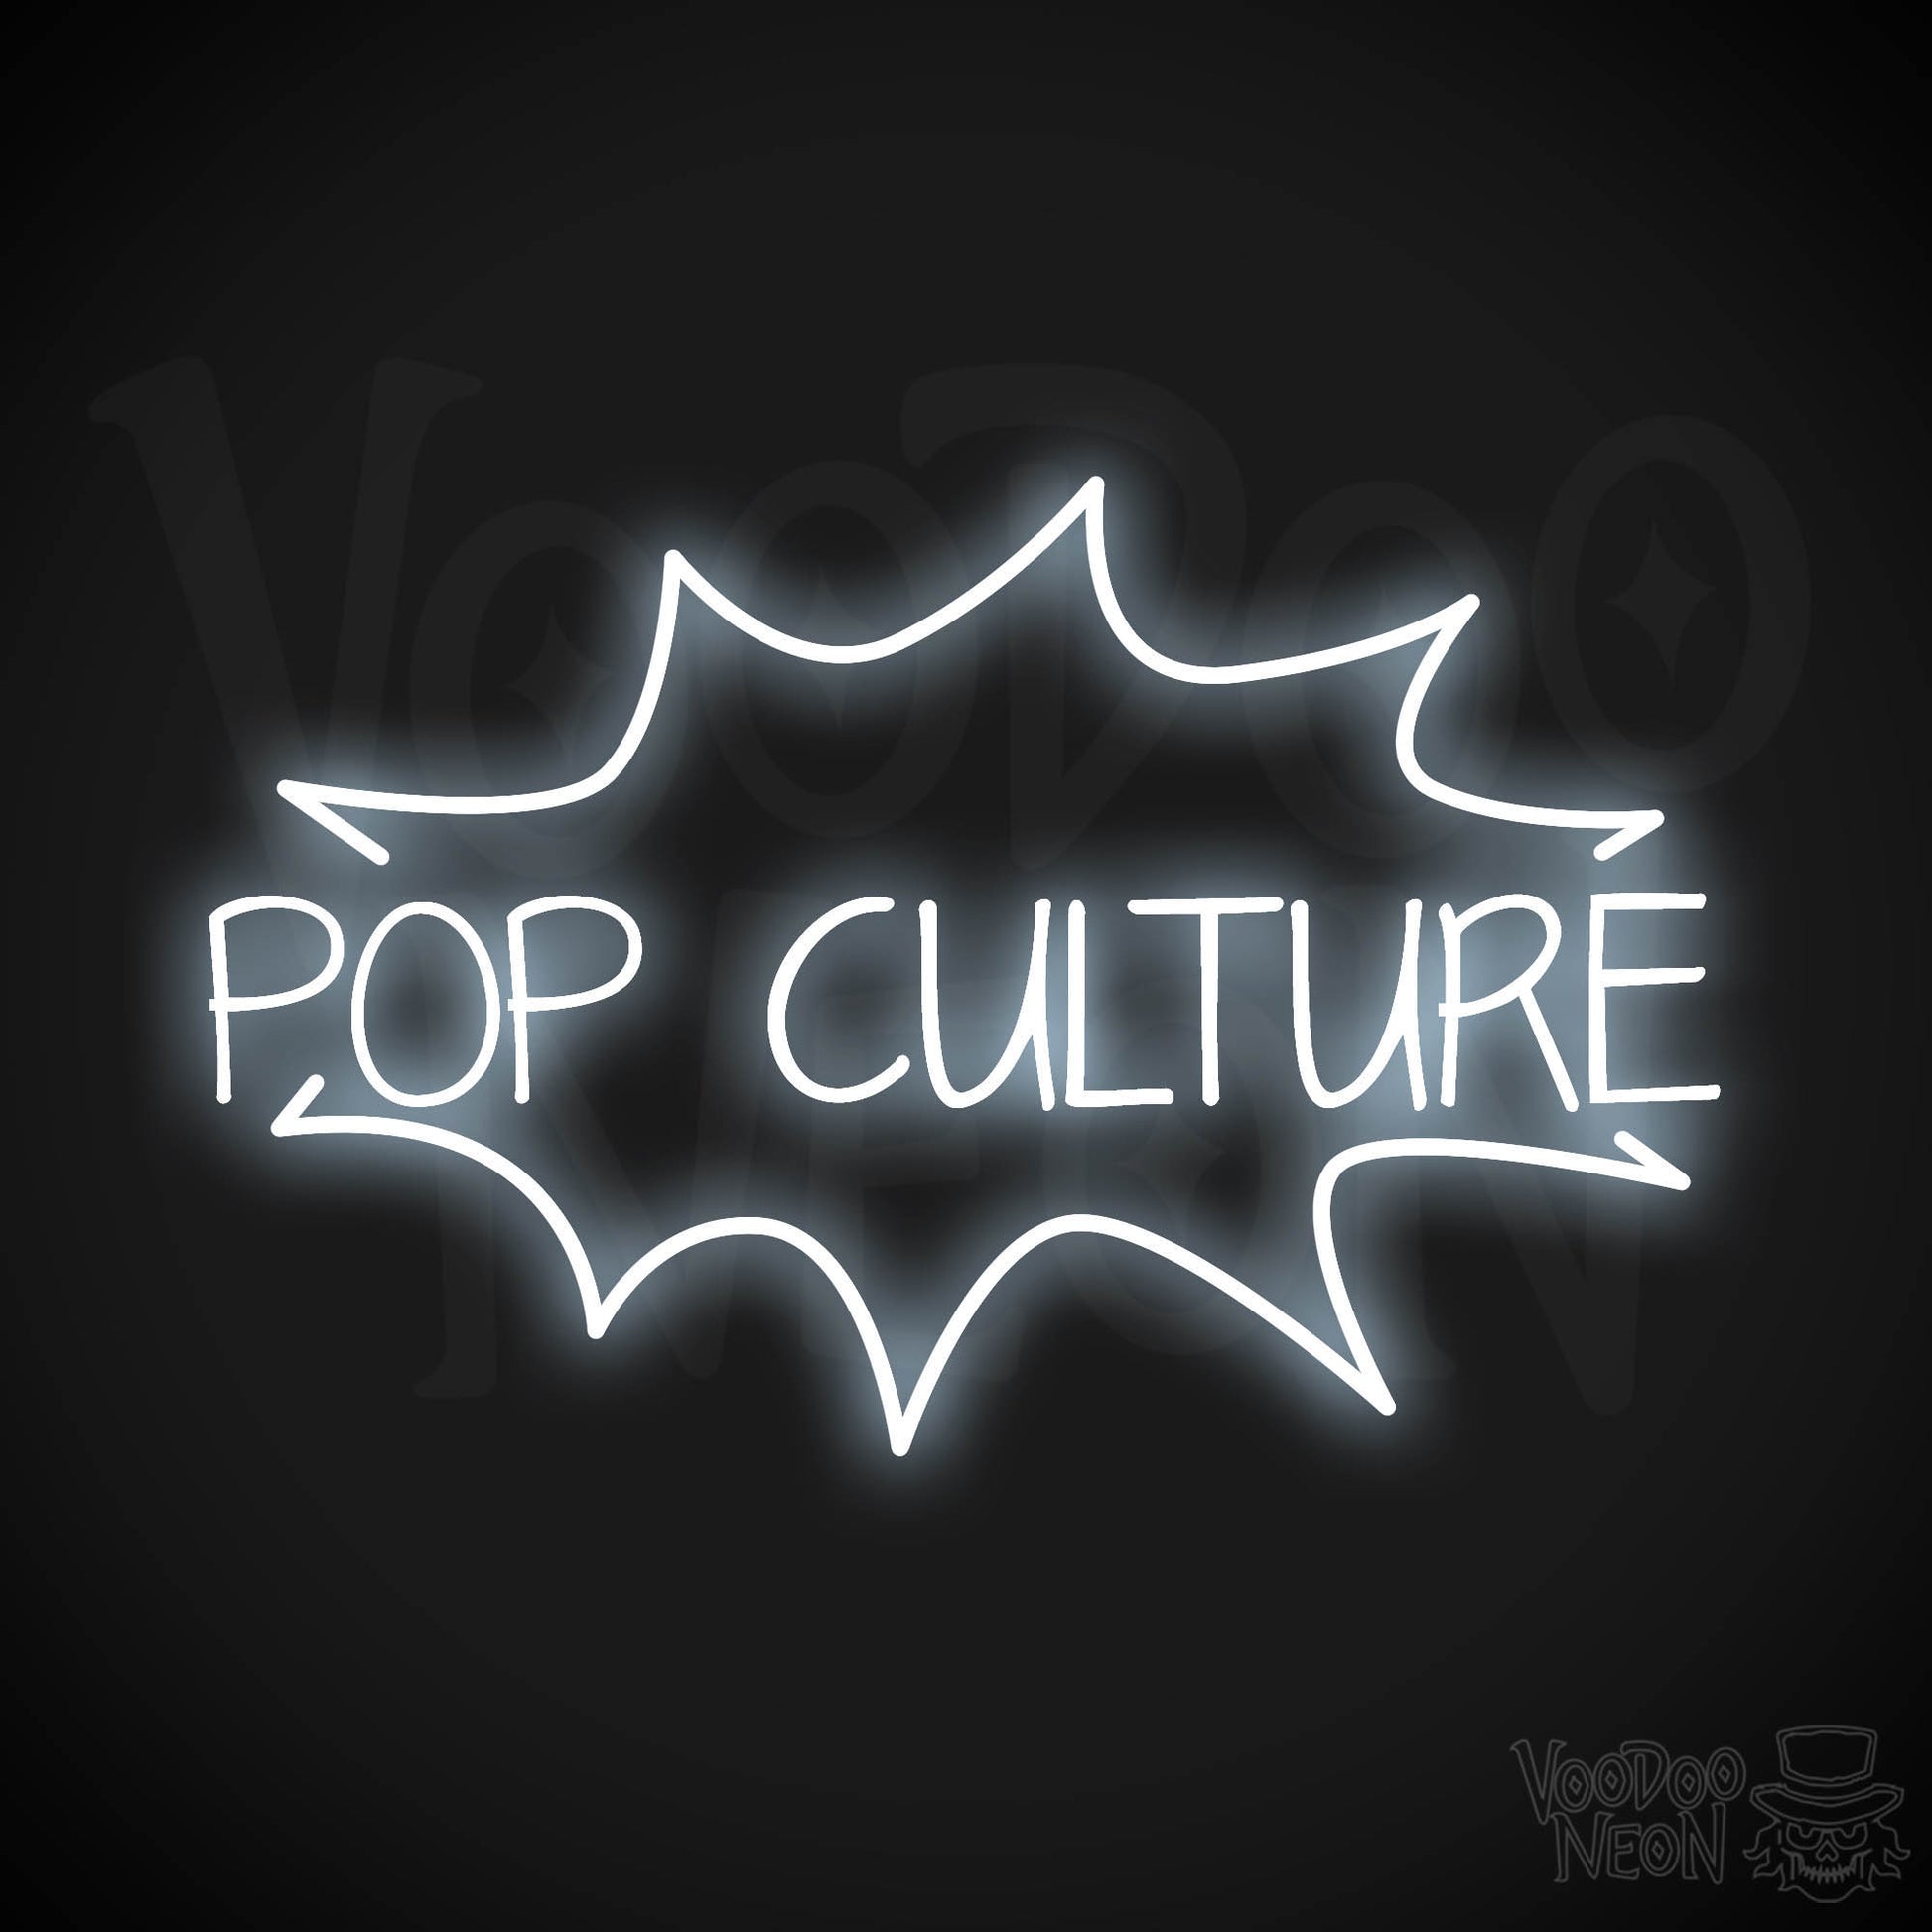 Pop Culture LED Neon - Cool White